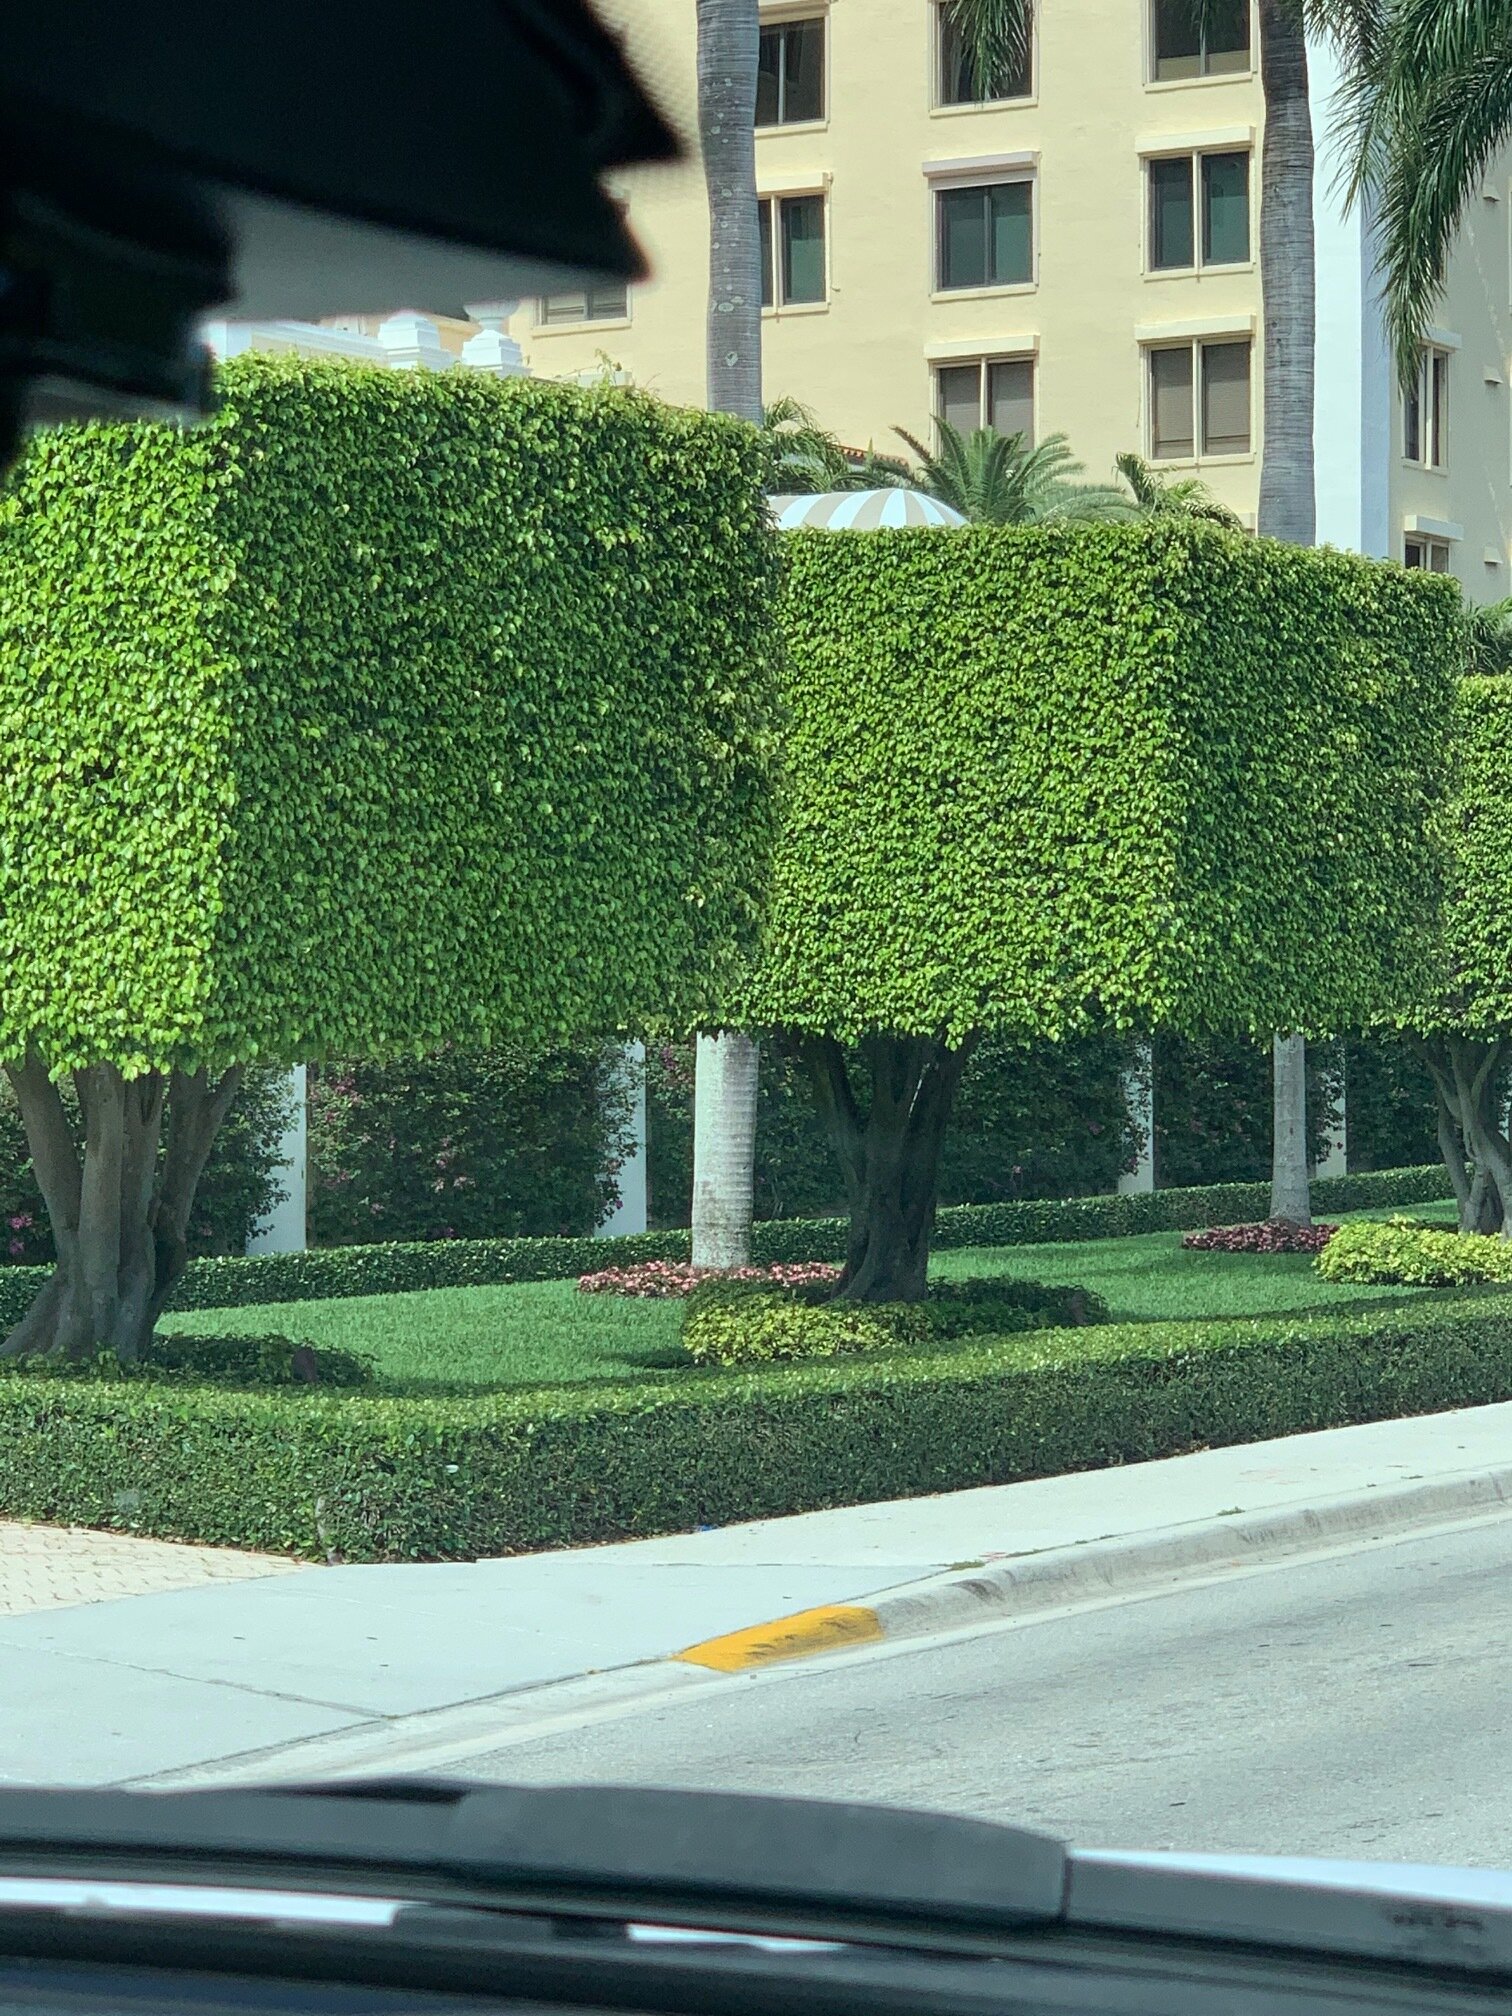  The attention given to greenery and landscaping in the Palm Beach area made the streets even more beautiful. 